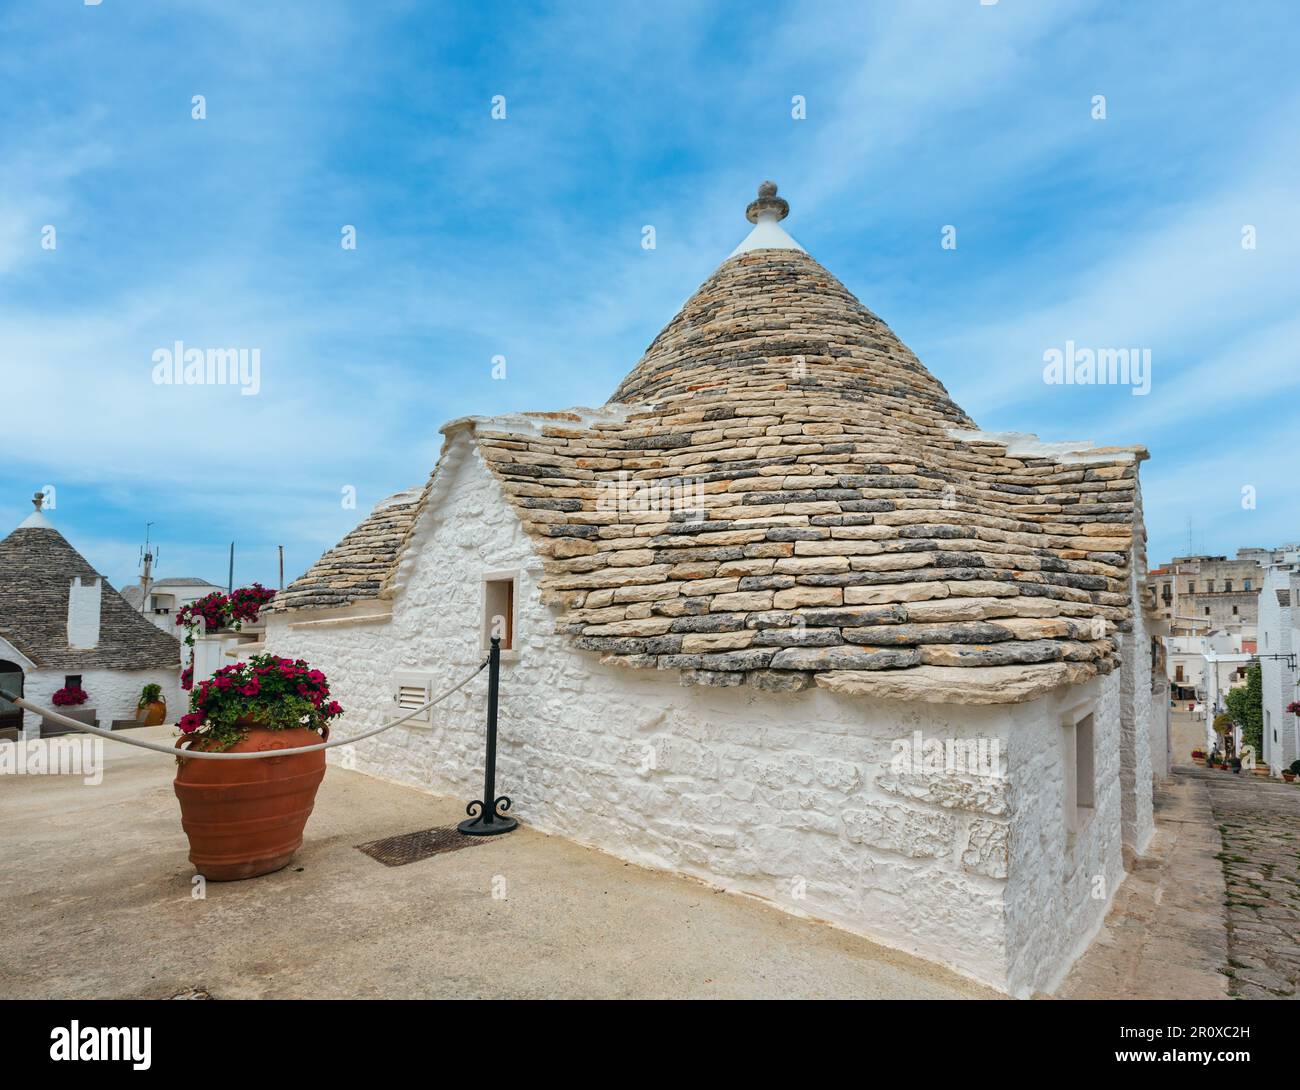 Trulli houses in main touristic district of Alberobello beautiful old historic town, Apulia region, Southern Italy Stock Photo